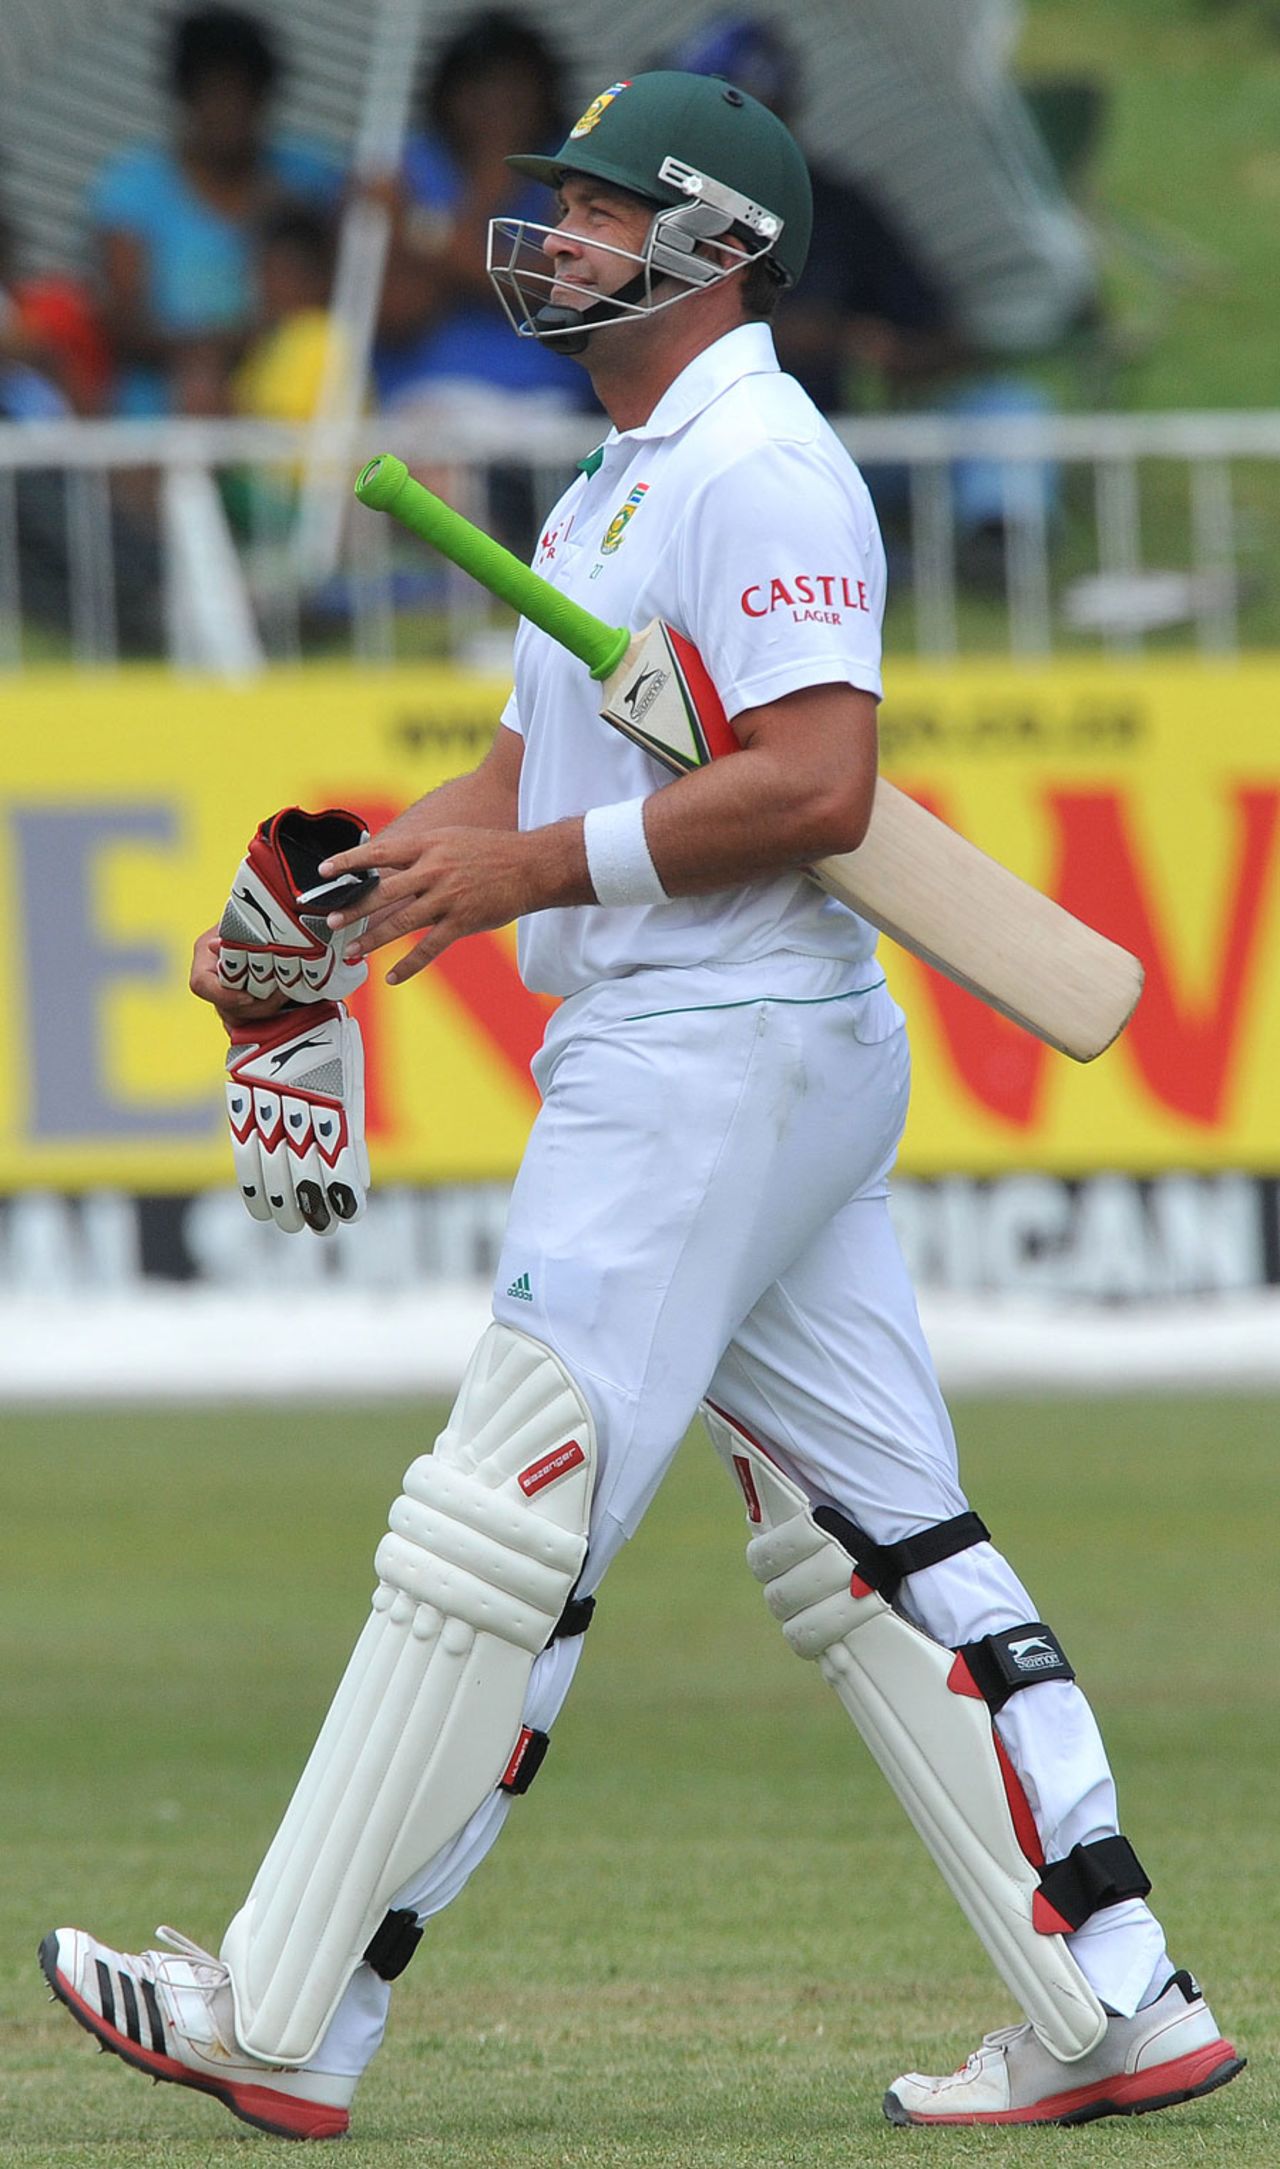 Jacques Kallis walks off after being dismissed for a duck, completing the first pair of his career, South Africa v Sri Lanka, 2nd Test, Durban, December, 29, 2011